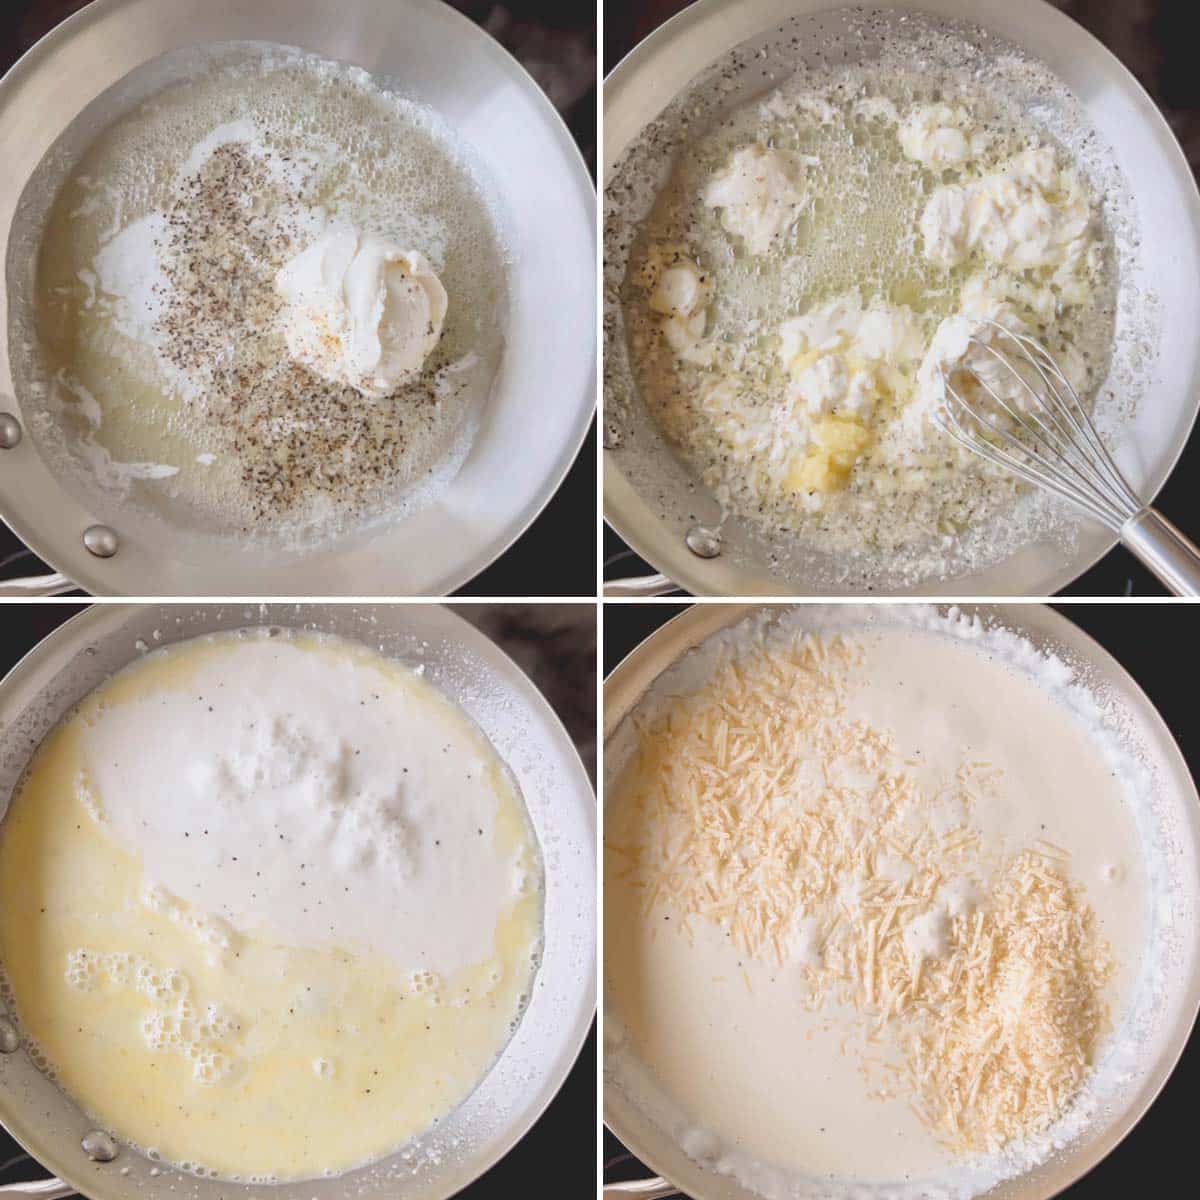 The process of creating alfredo sauce from scratch in a pan.